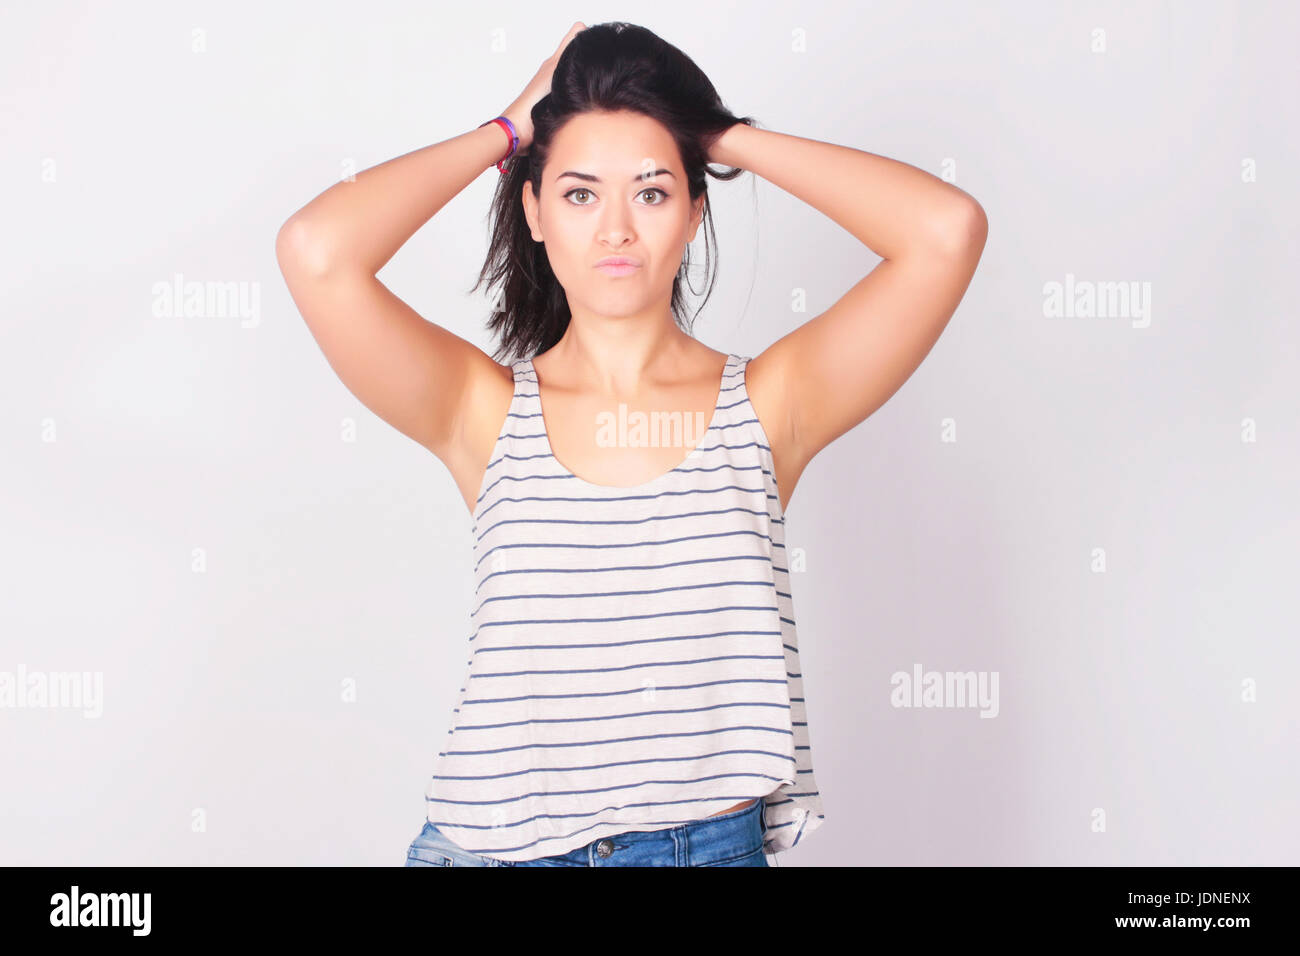 Portrait of beautiful carefree young woman, isolated over white background. Caucasian woman smiling. Stock Photo